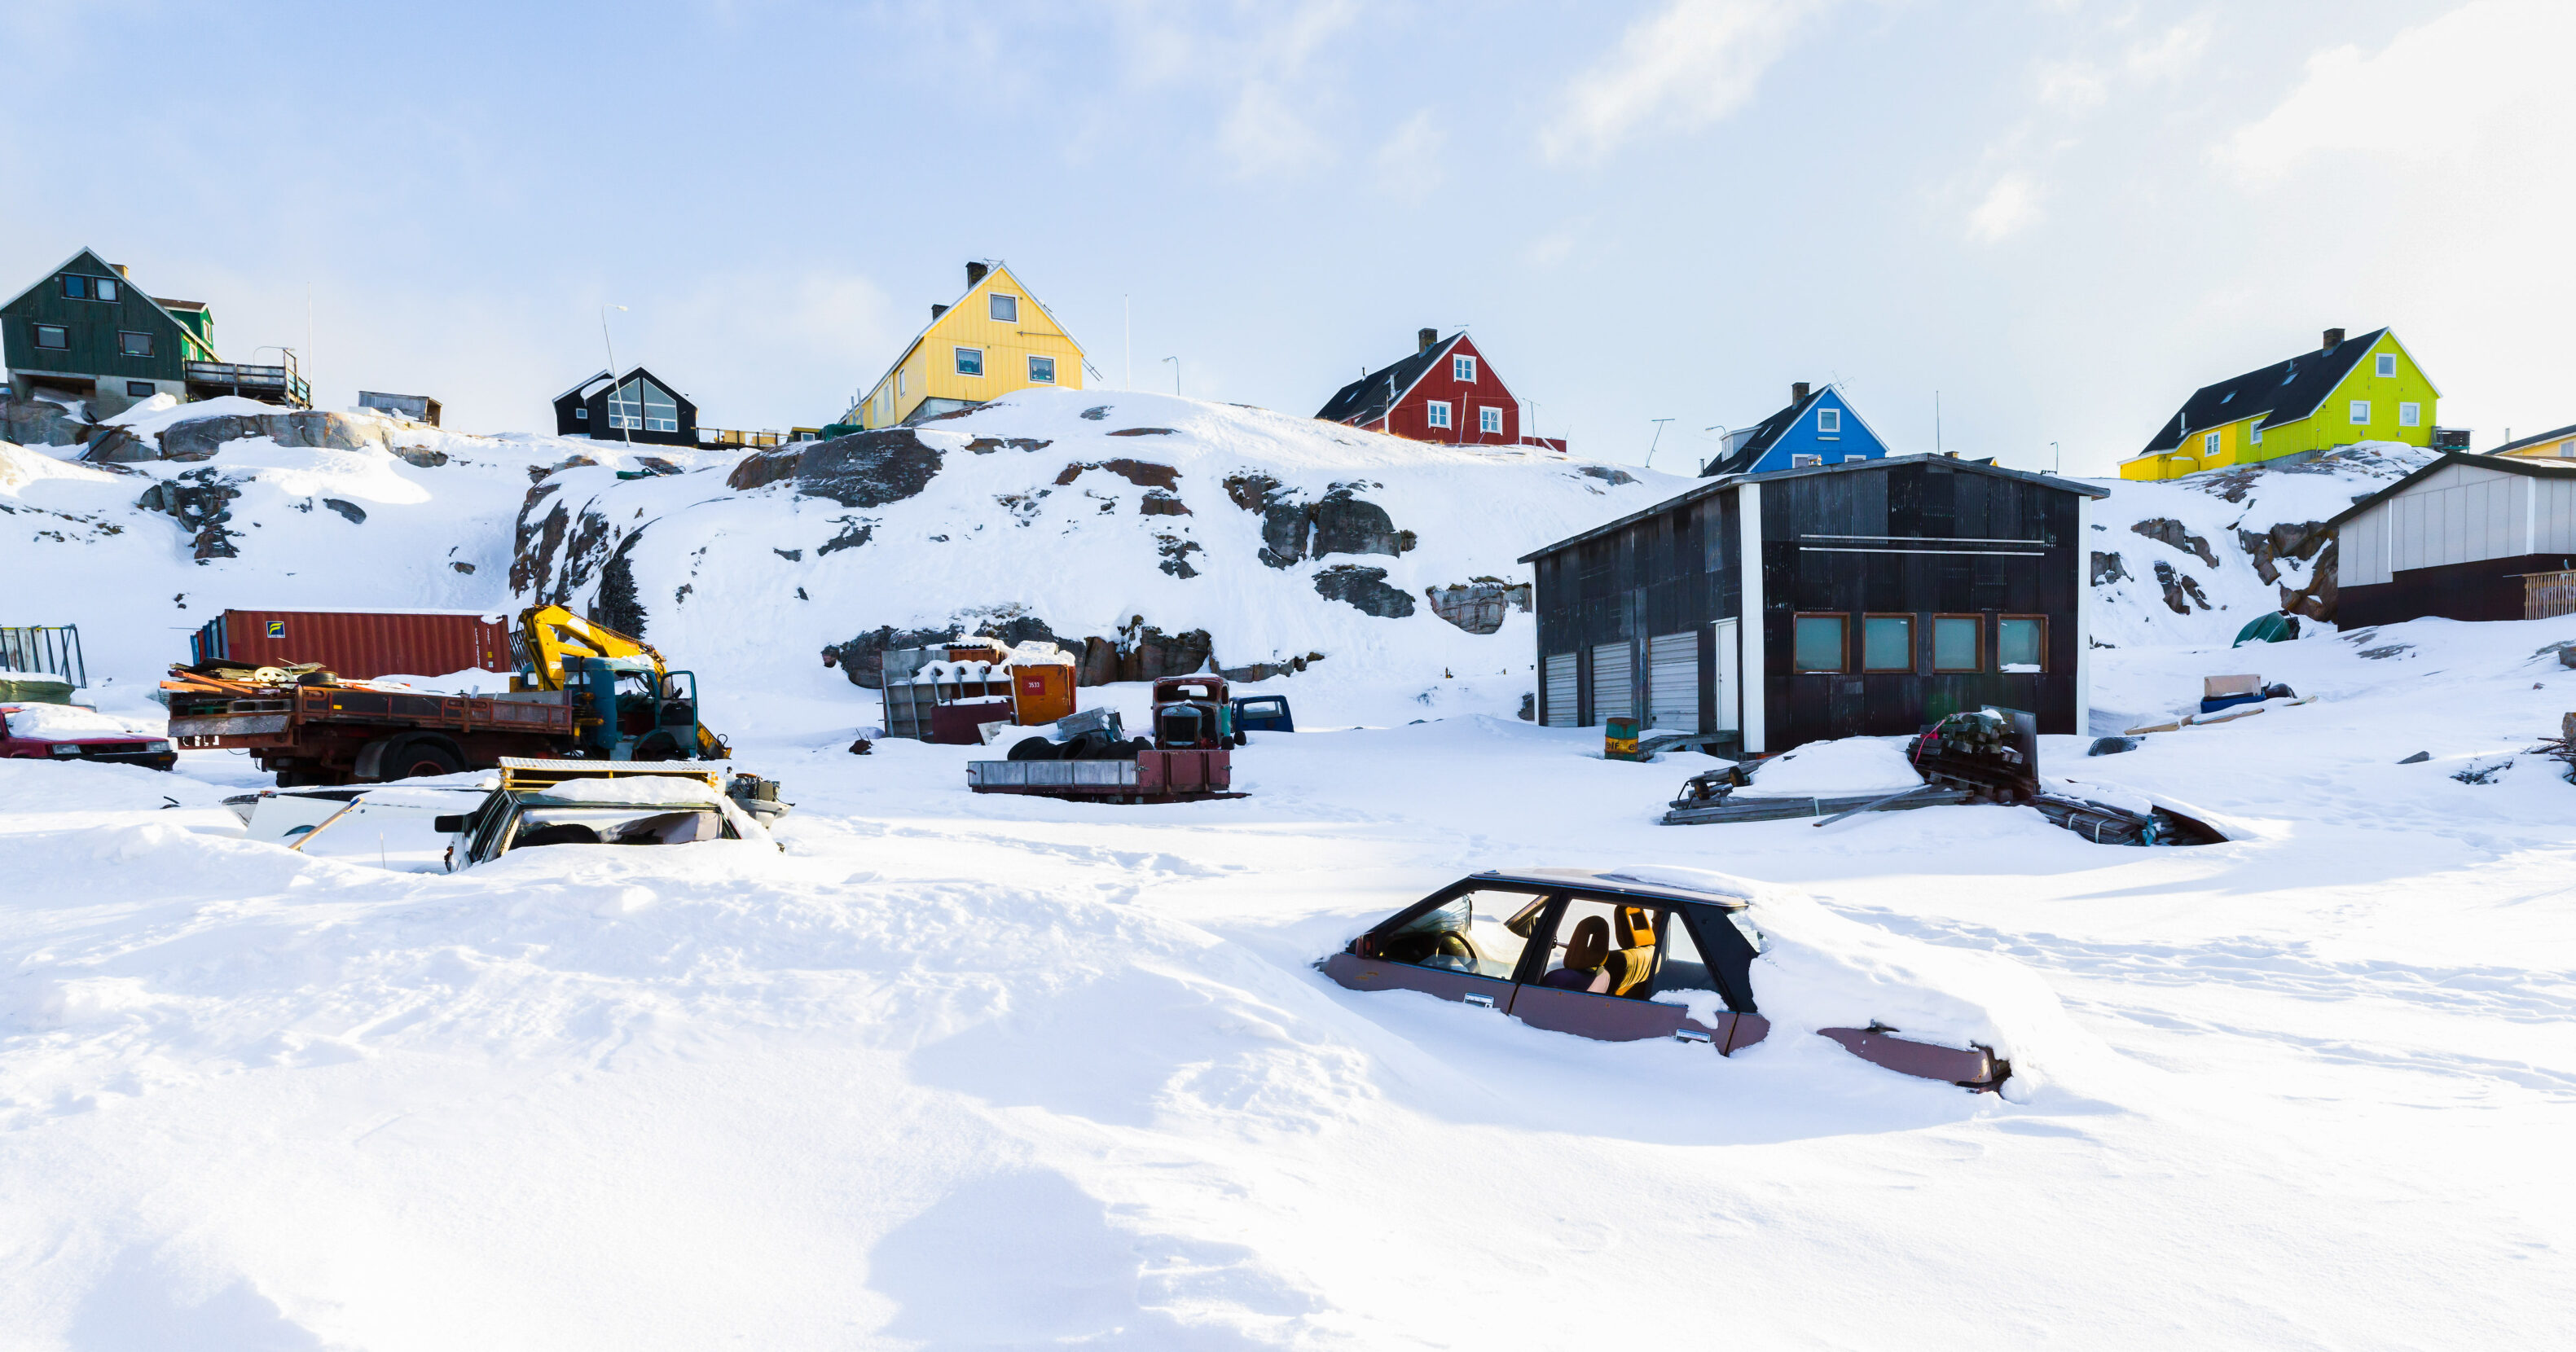 Fresh snow blankets a landscape of brightly colored buildings and snow-covered cars.